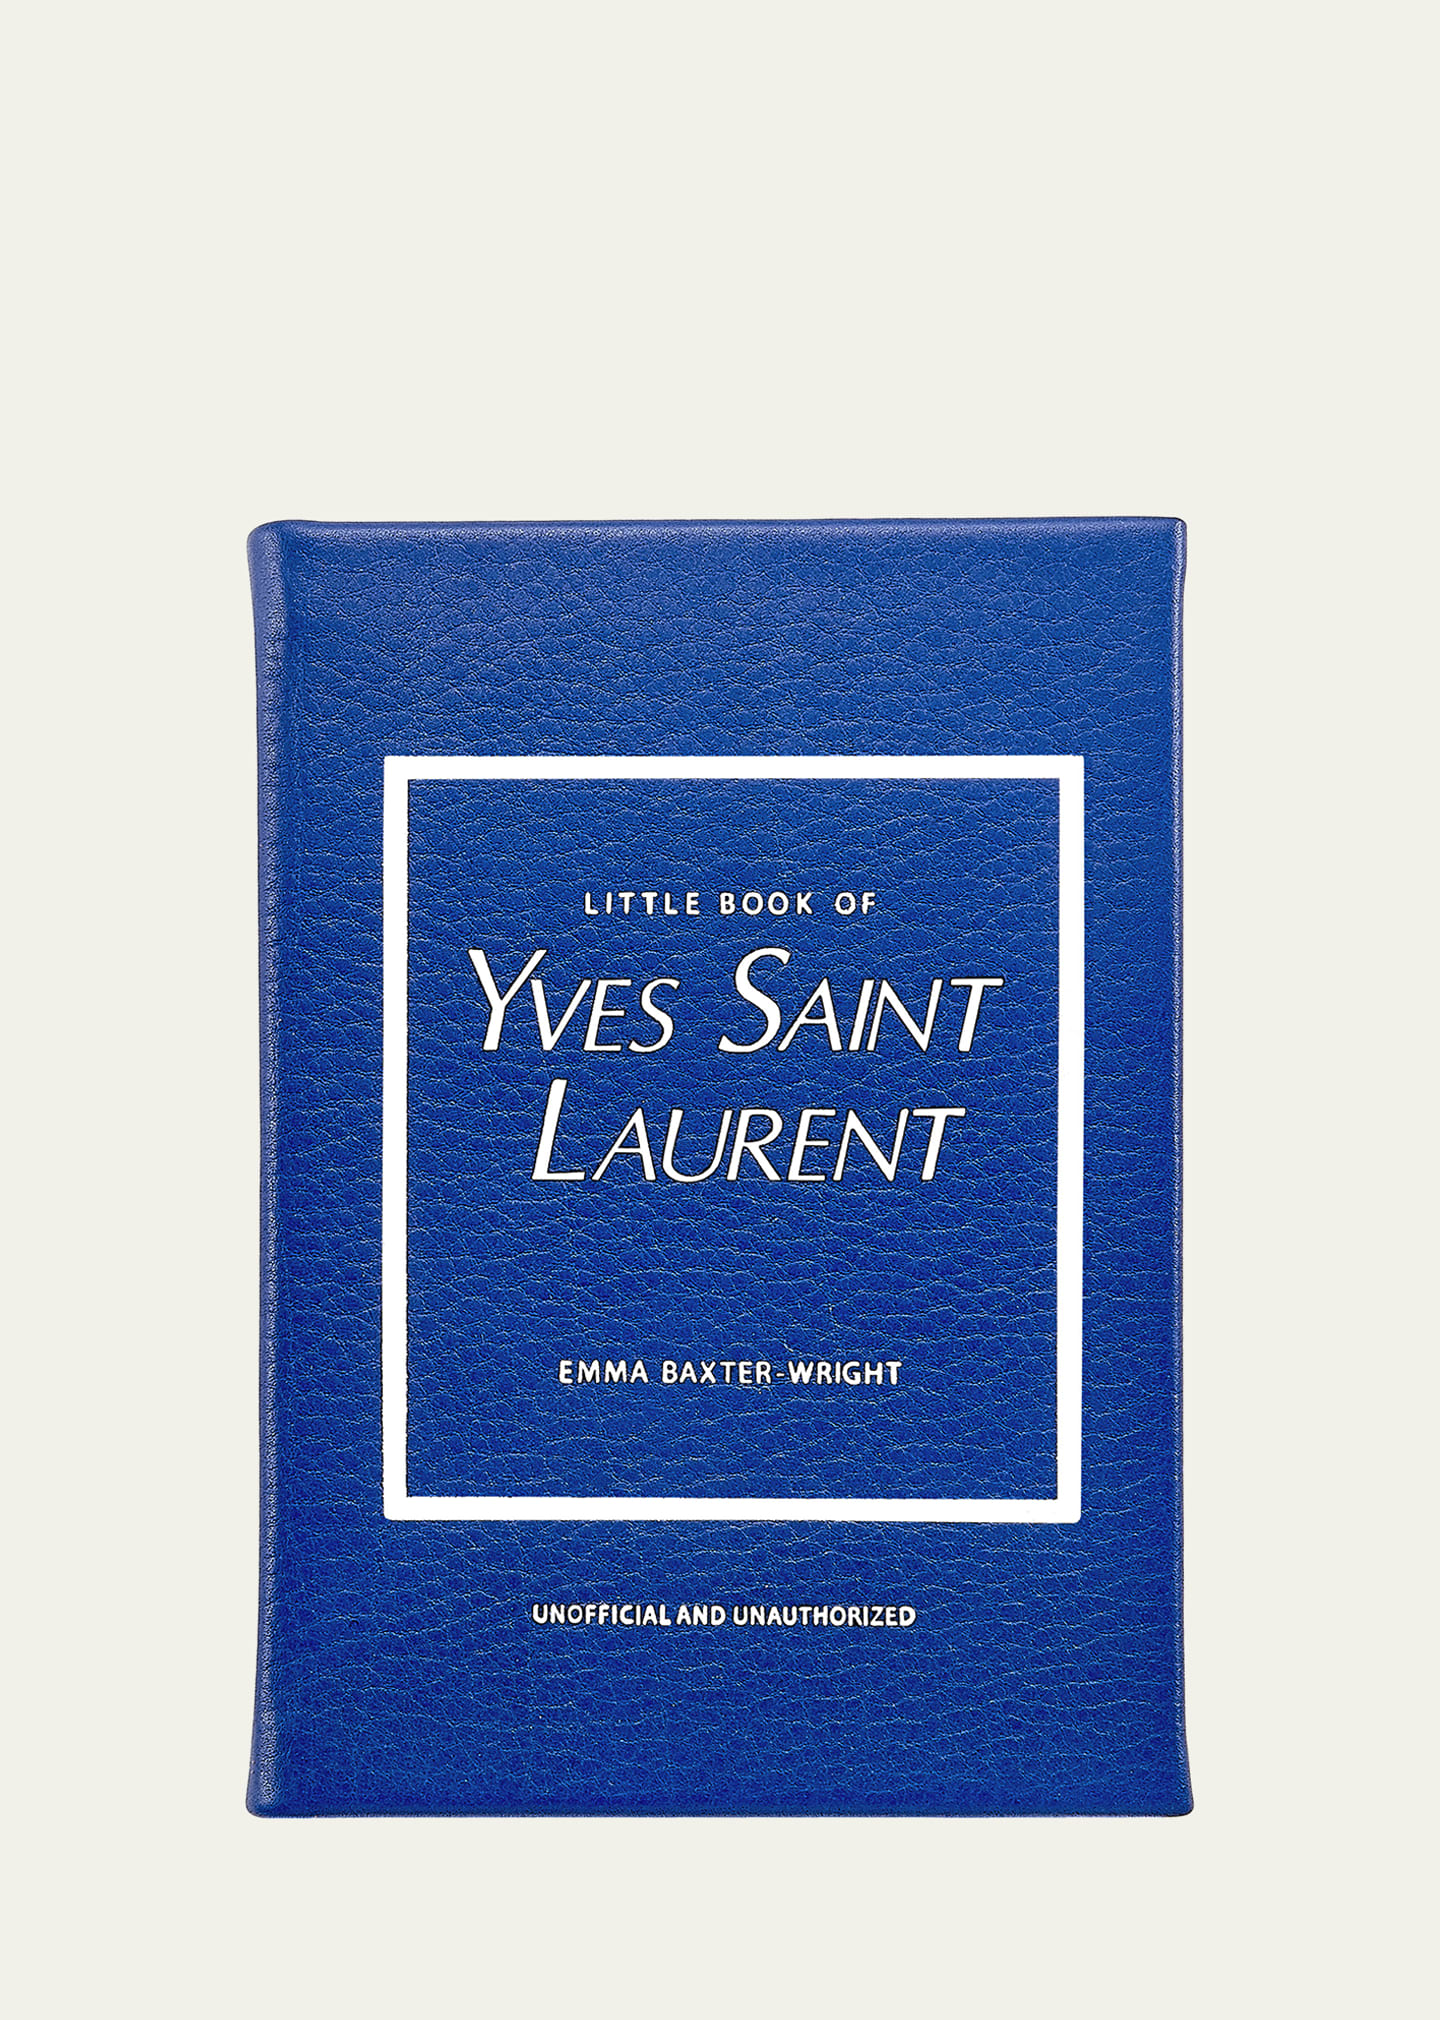 "Little Book of Yves Saint Laurent" Book by Emma Baxter-Wright